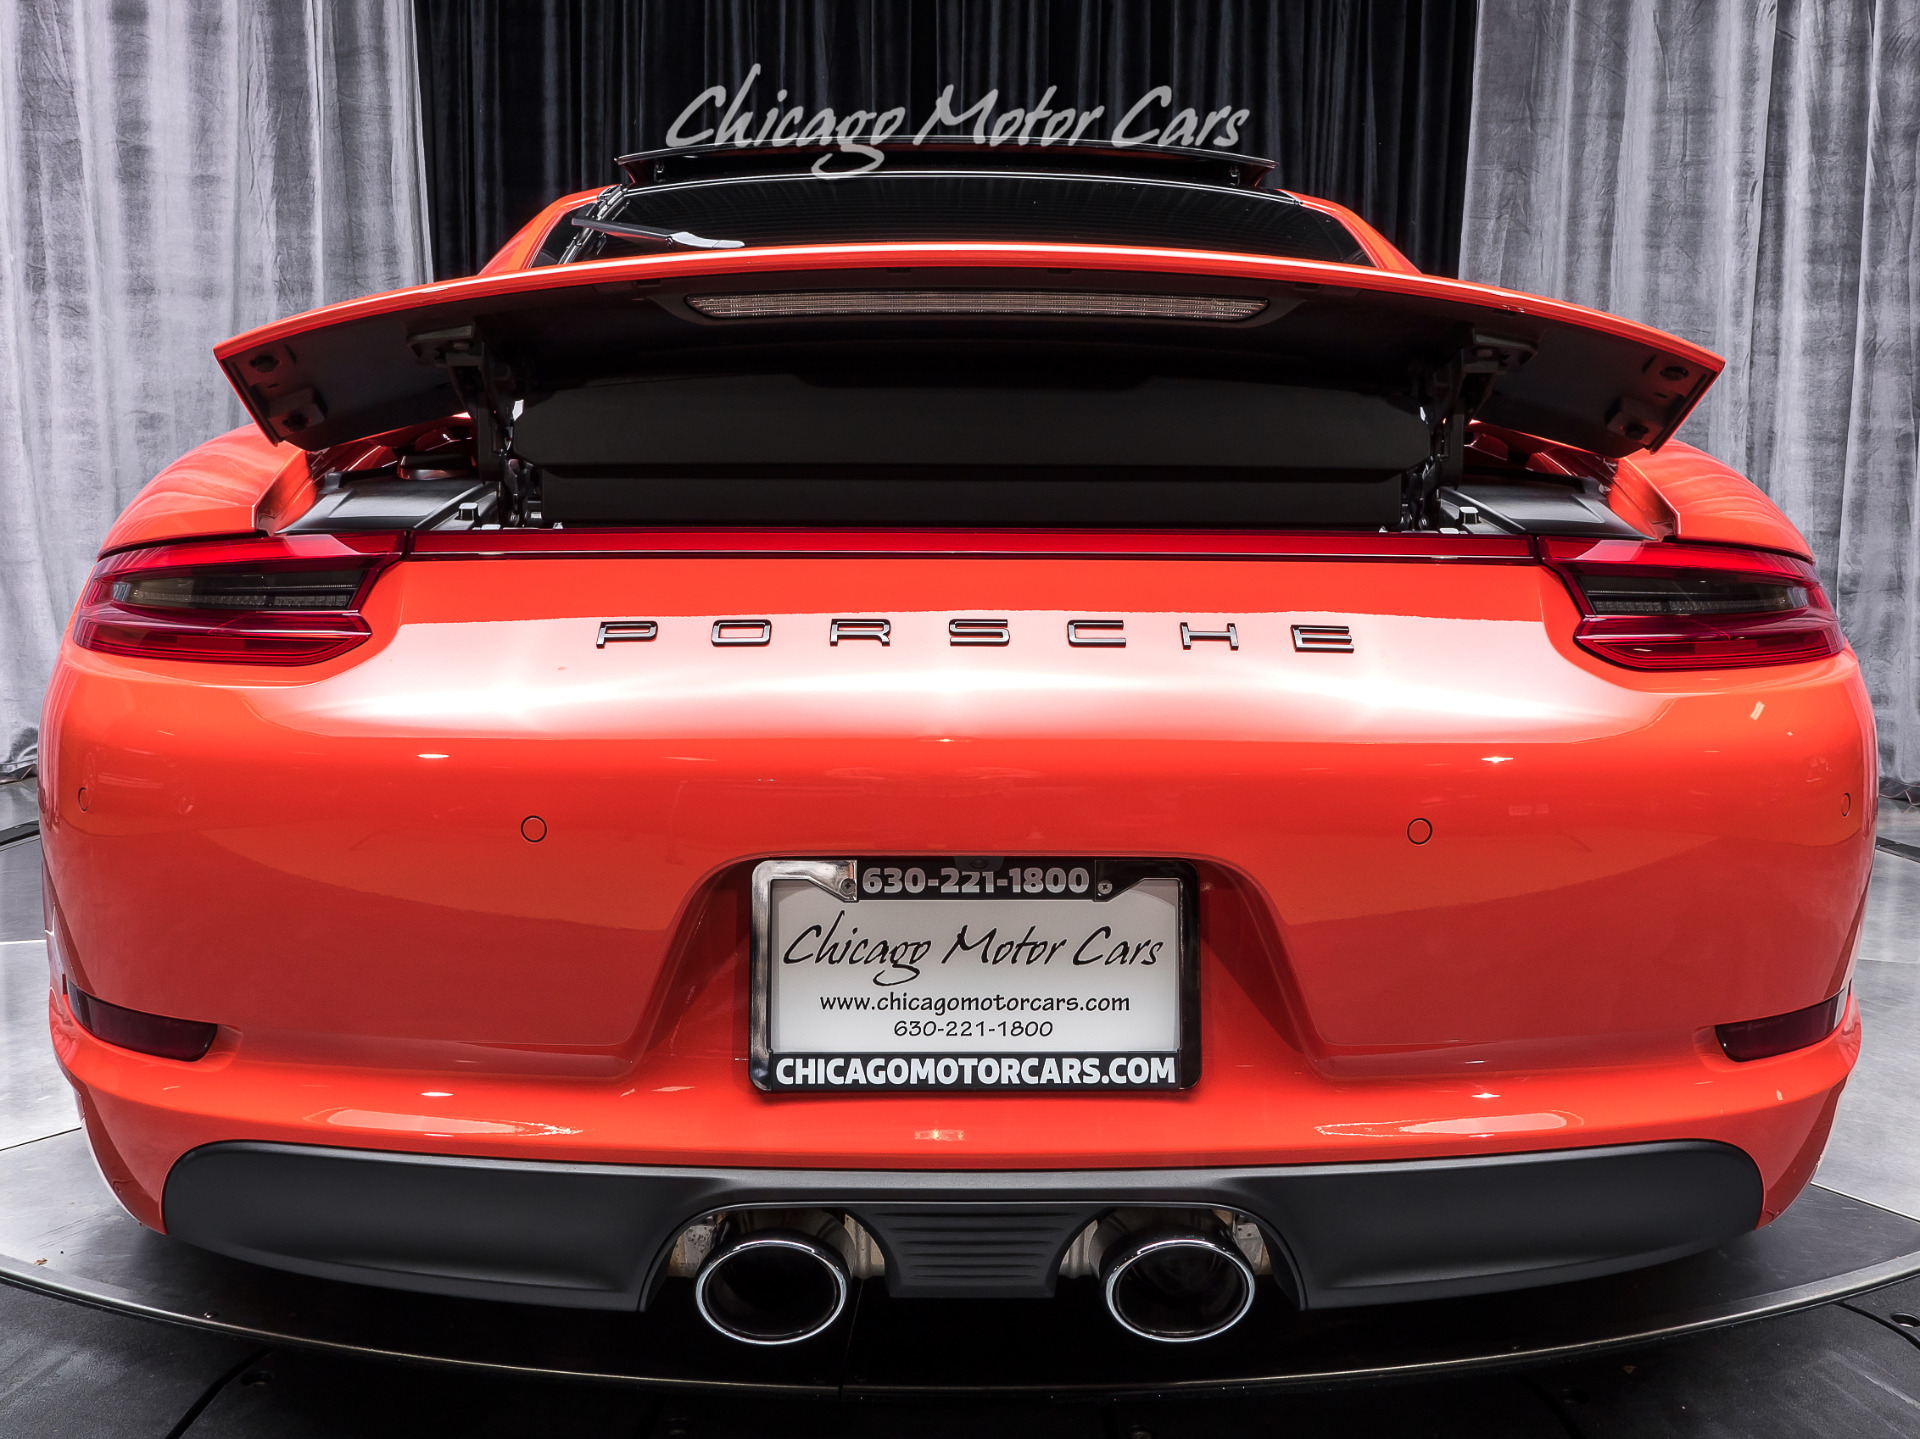 Used 2017 Porsche 911 Carrera 4s Coupe Msrp 137450 For